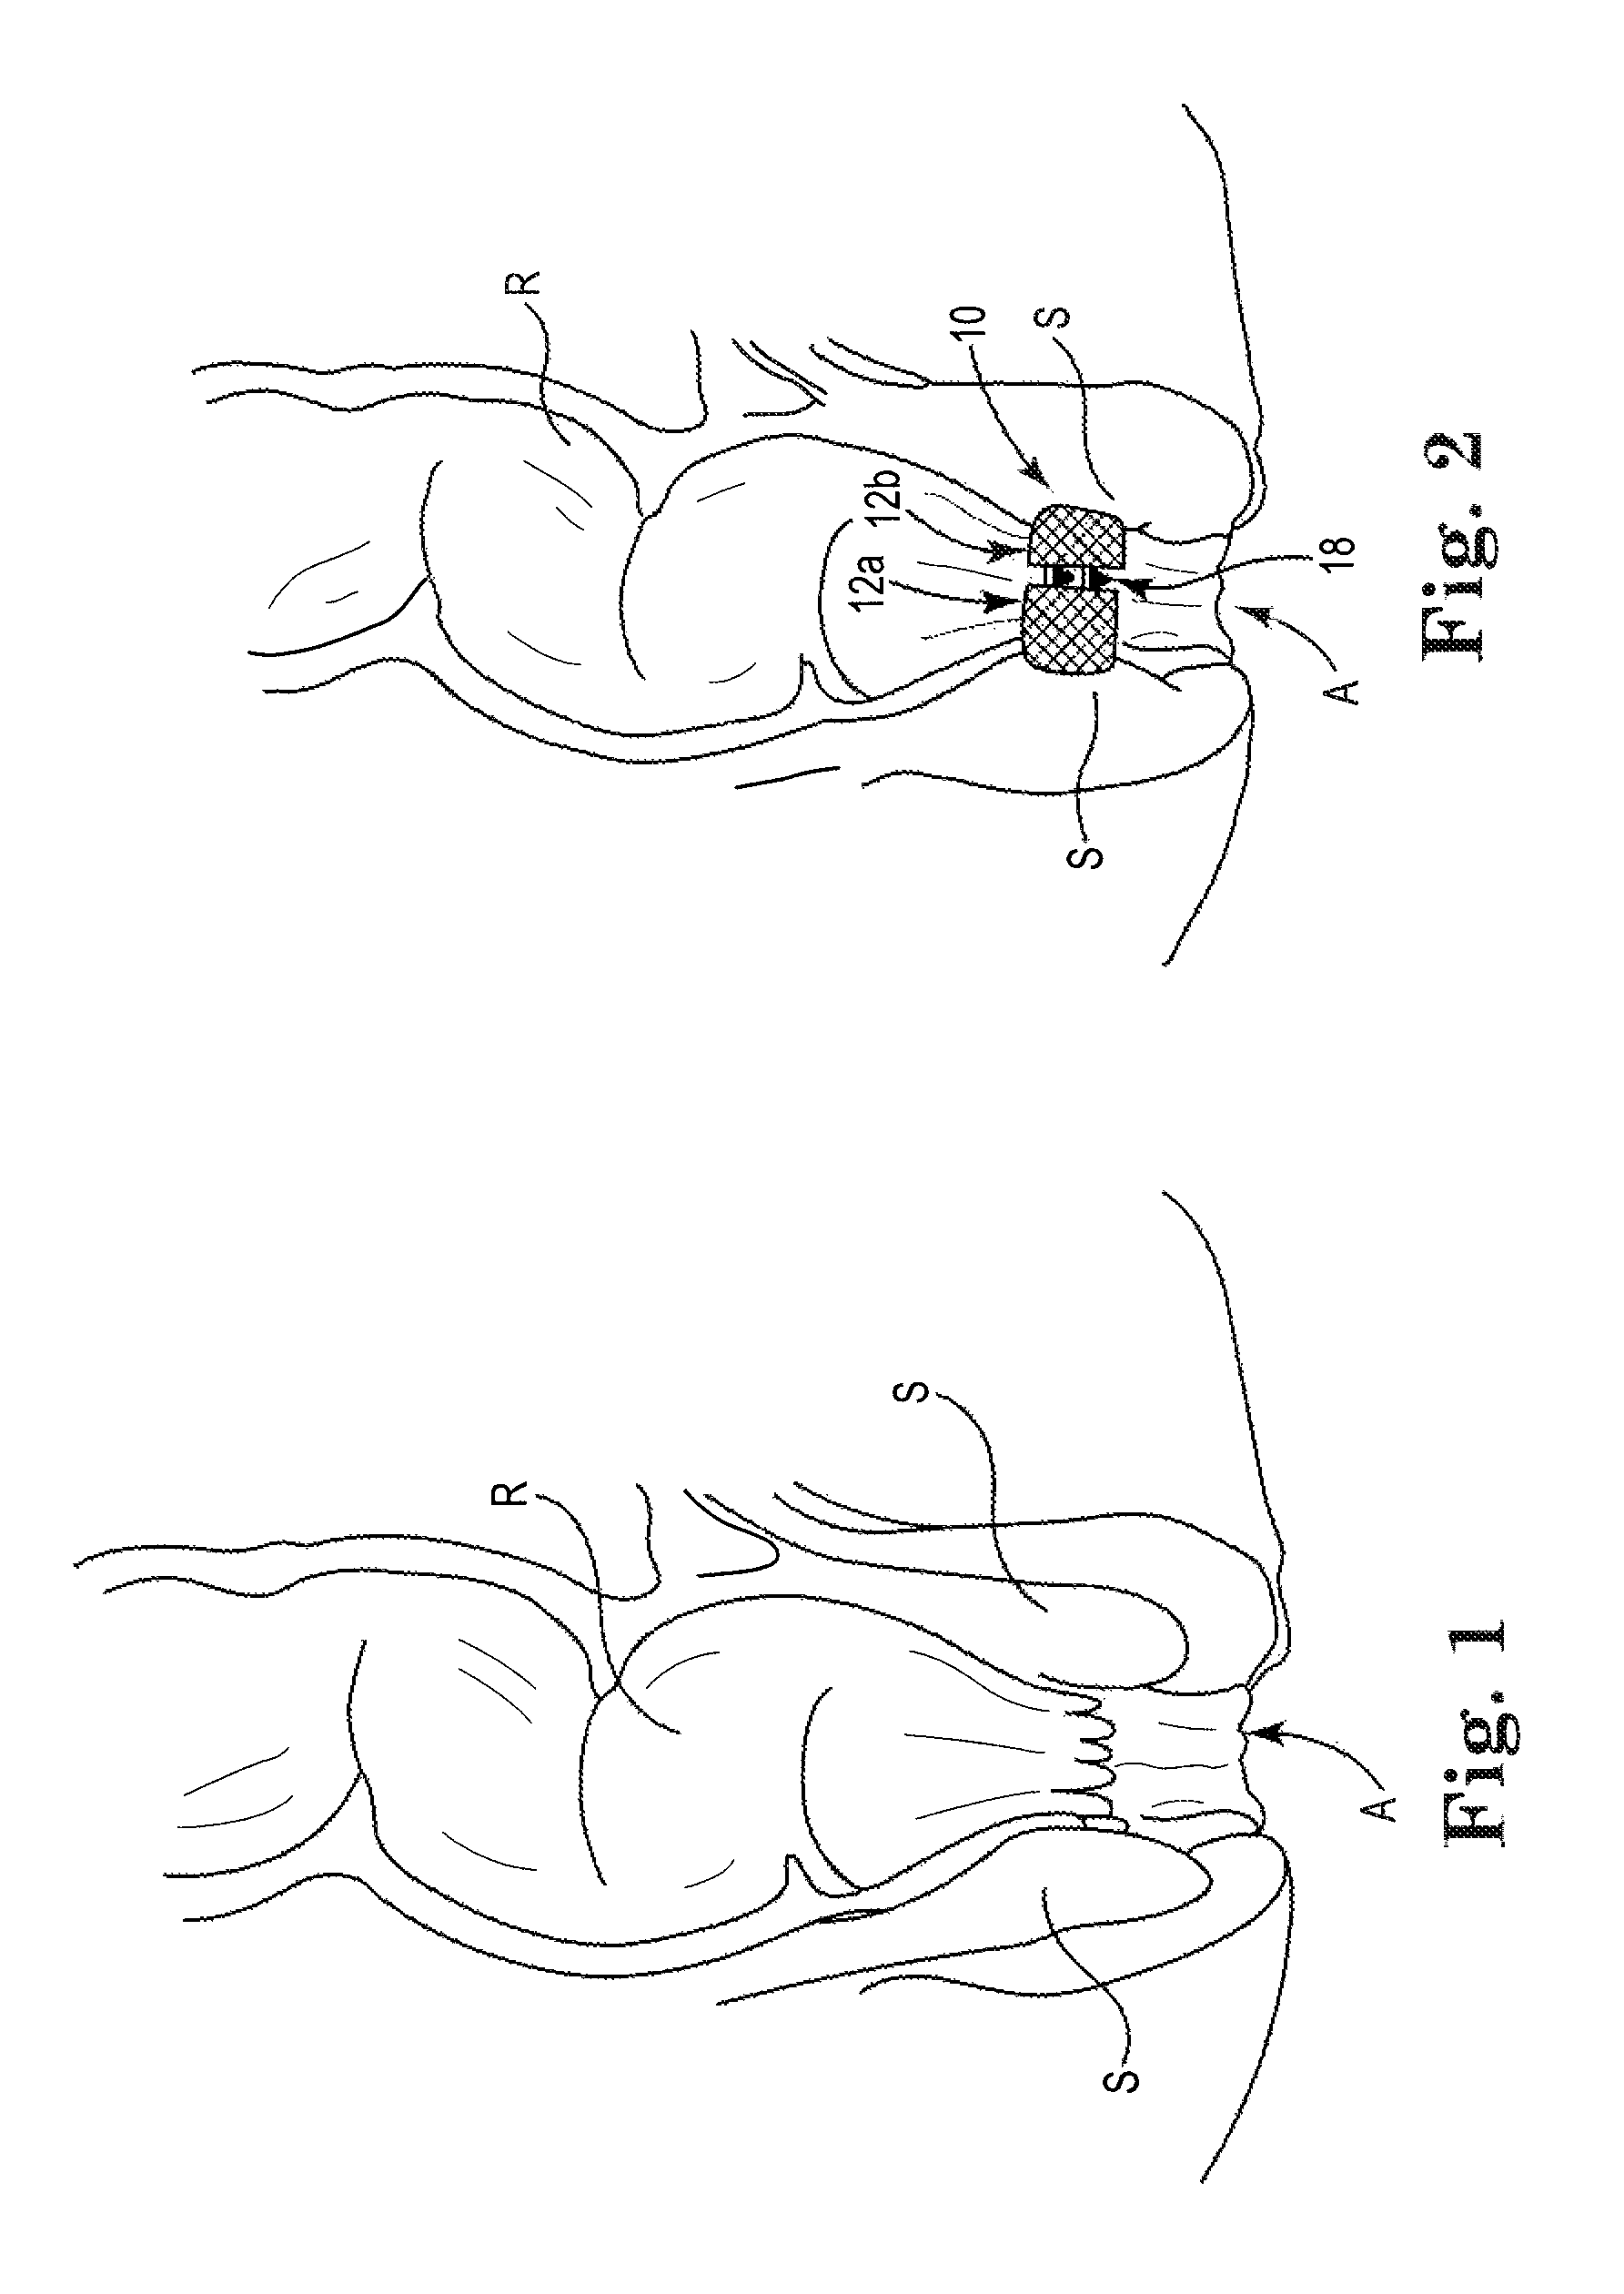 Fecal incontinence treatment device and method